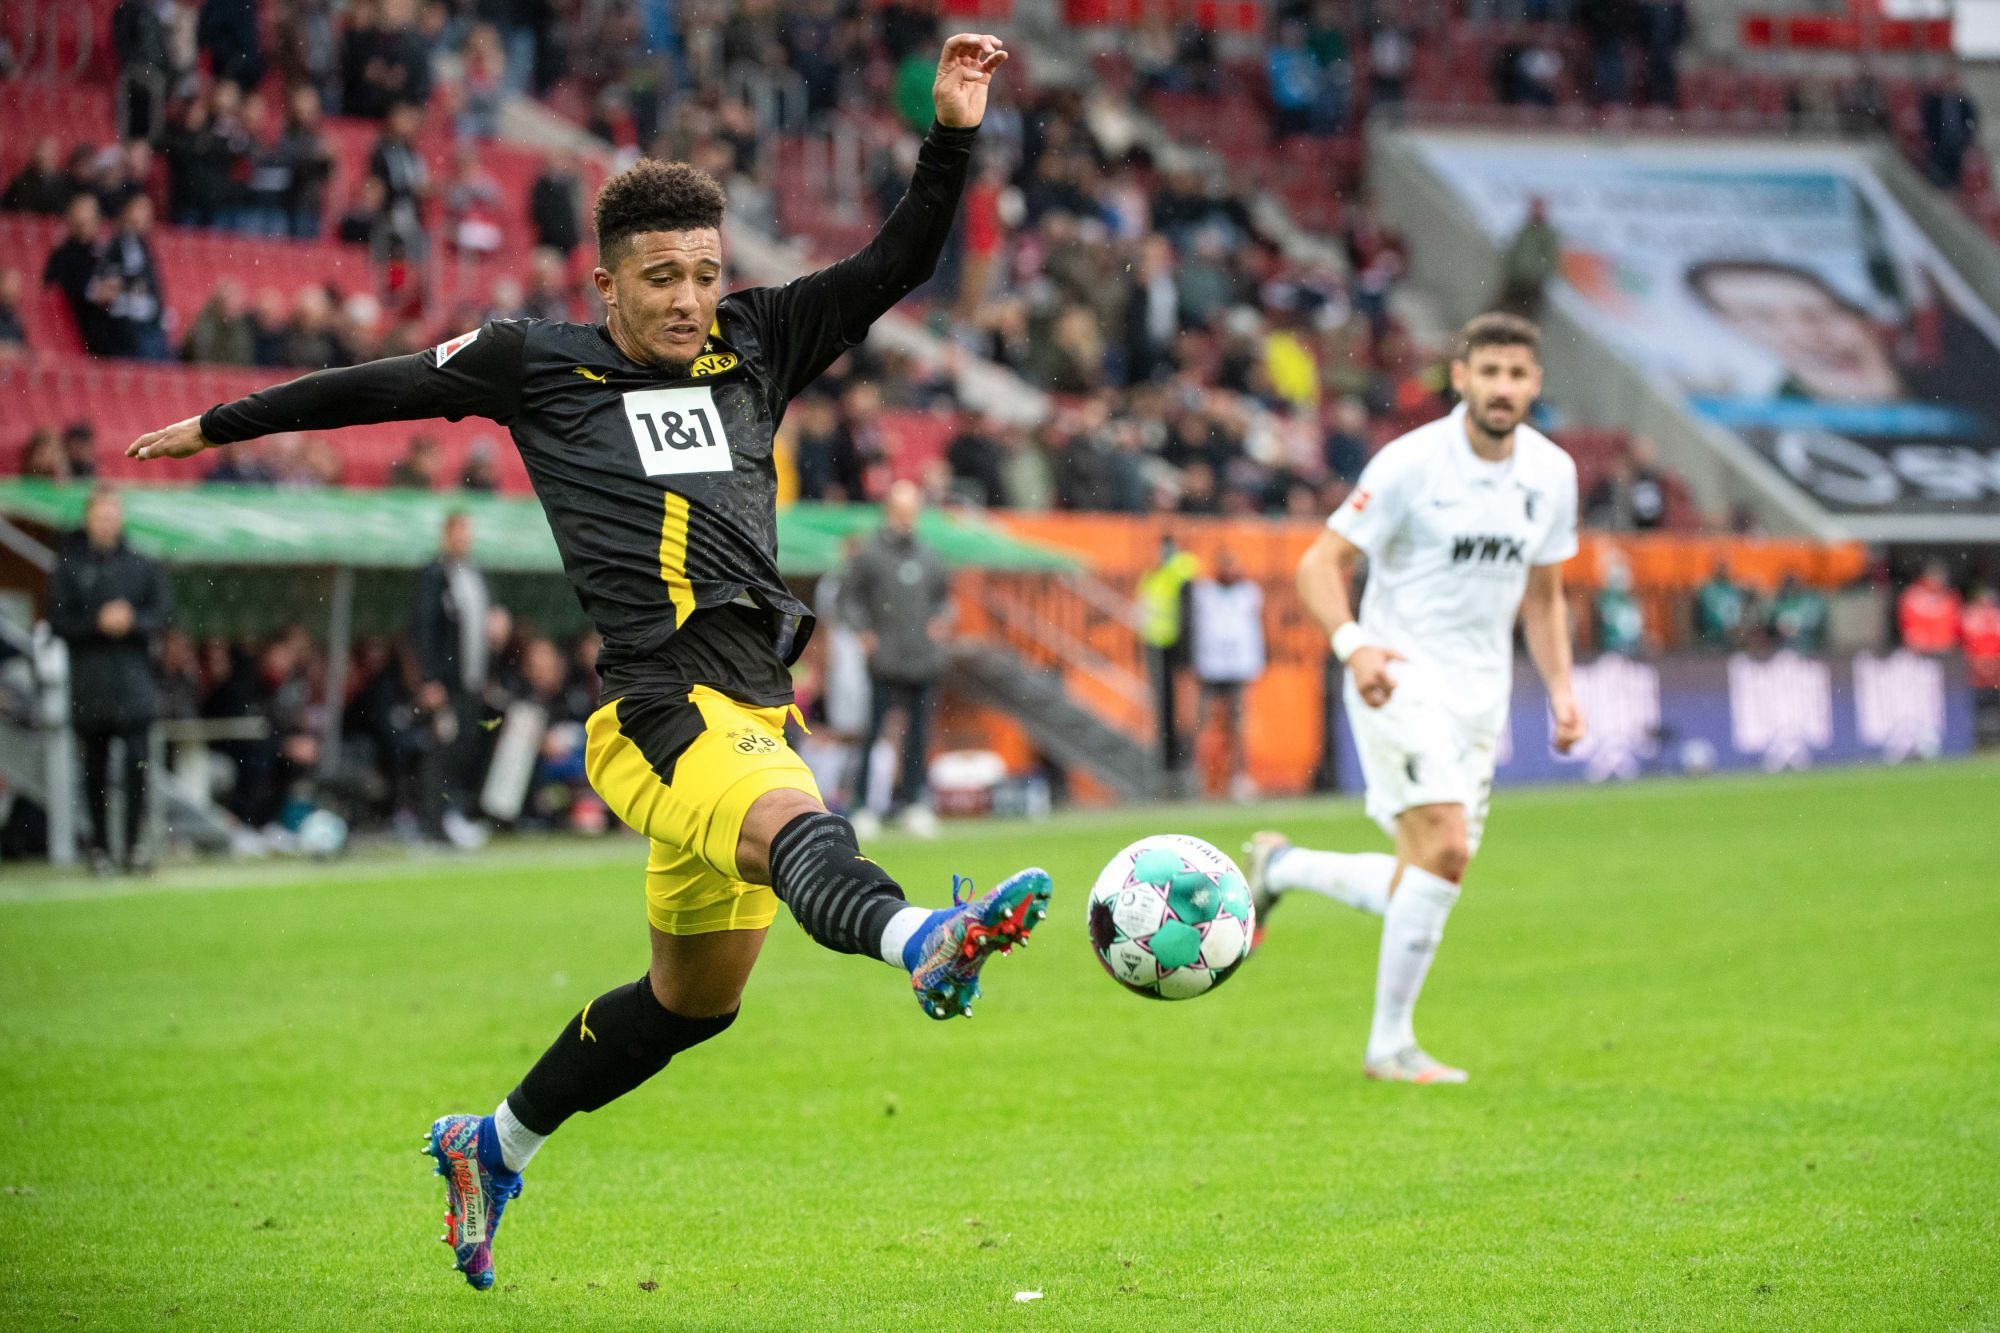 26 September 2020, Bavaria, Augsburg: Football: Bundesliga, FC Augsburg - Borussia Dortmund, 2nd matchday in the WWK-Arena. Jadon Sancho from Dortmund plays the ball. In the back, Daniel Caligiuri from Augsburg is running. Photo: Matthias Balk/dpa - IMPORTANT NOTE: In accordance with the regulations of the DFL Deutsche Fußball Liga and the DFB Deutscher Fußball-Bund, it is prohibited to exploit or have exploited in the stadium and/or from the game taken photographs in the form of sequence images and/or video-like photo series. 
By Icon Sport - WWK Arena - Augsbourg (Allemagne)